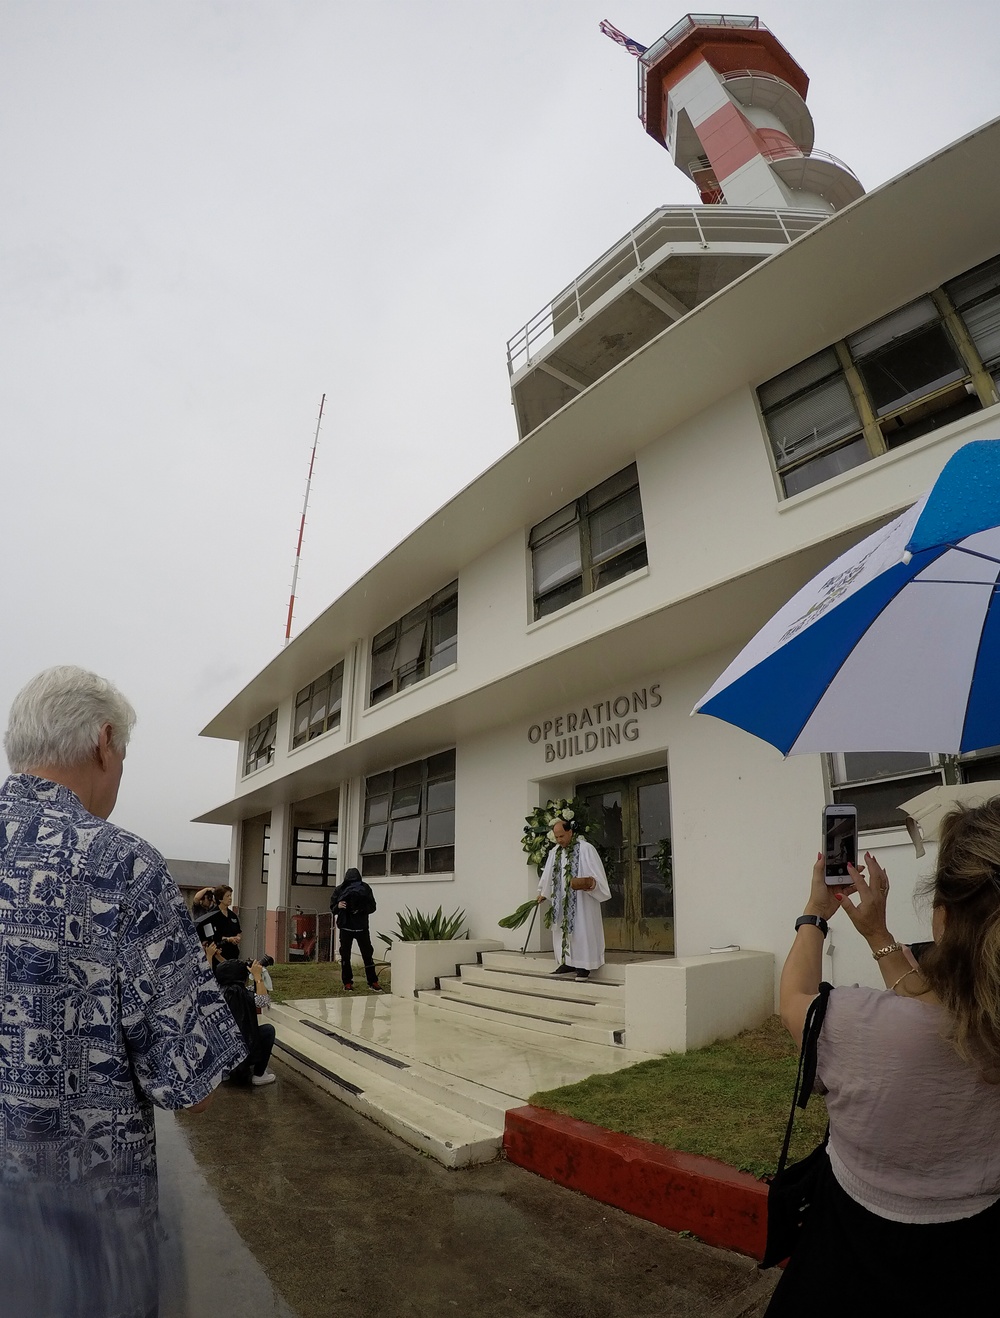 Aerological Tower Dedication During 75th Commeroration of the Attack on Pearl Harbor